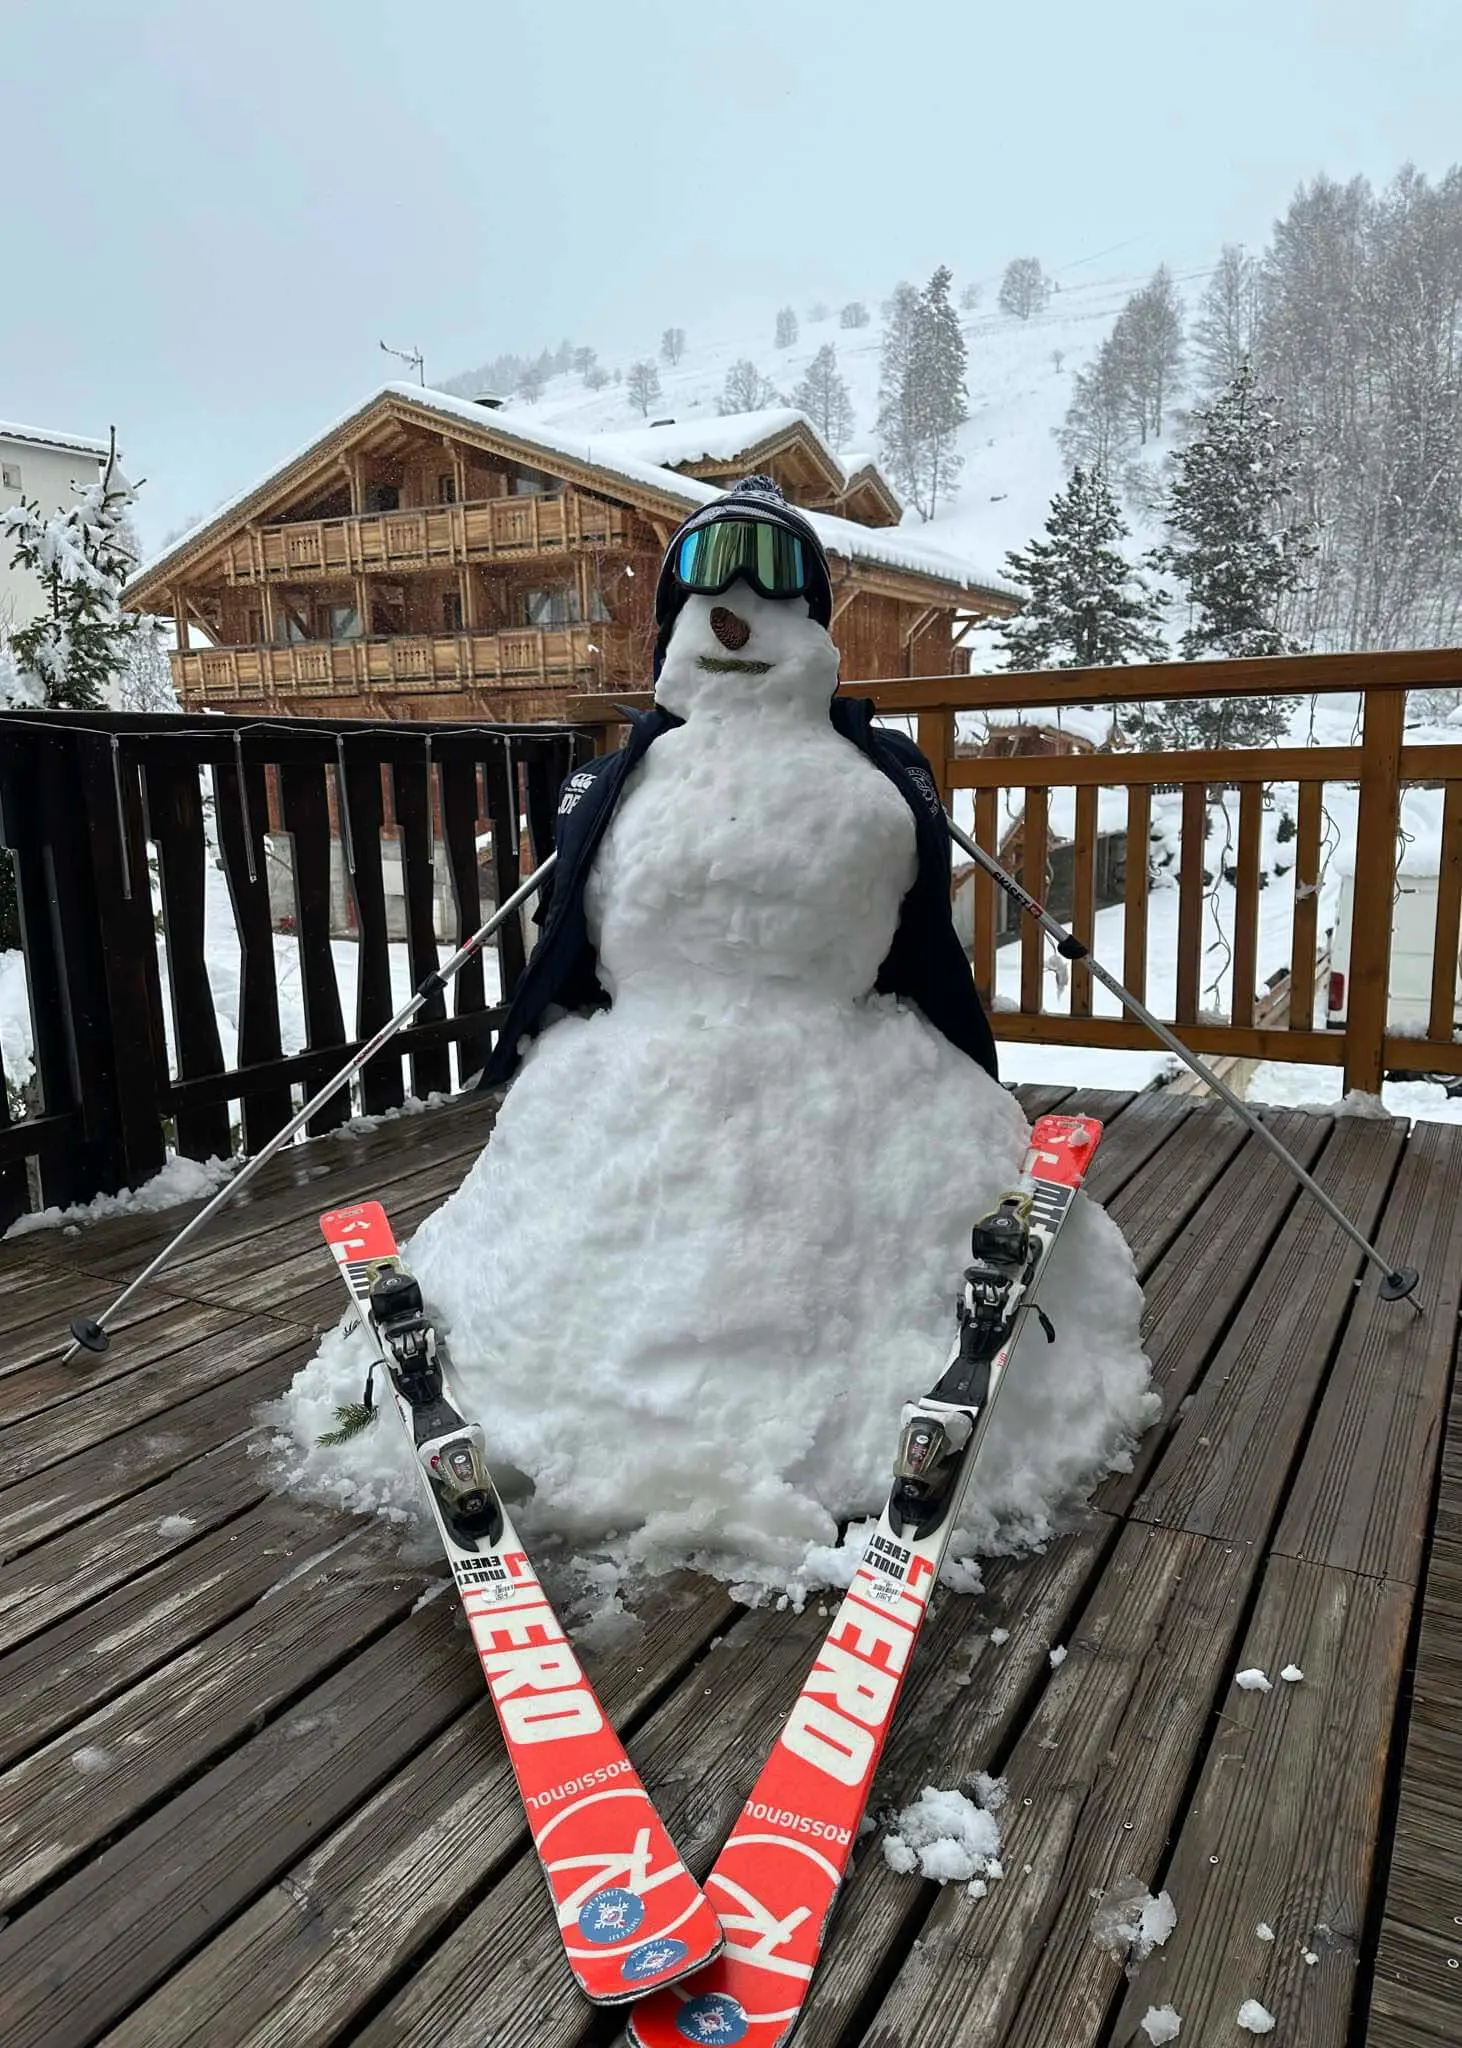 Senior pupils made a snowman during their ski trip to the Alps | Ibstock Place School, a private school near Richmond, Barnes, Putney, Kingston, and Wandsworth.